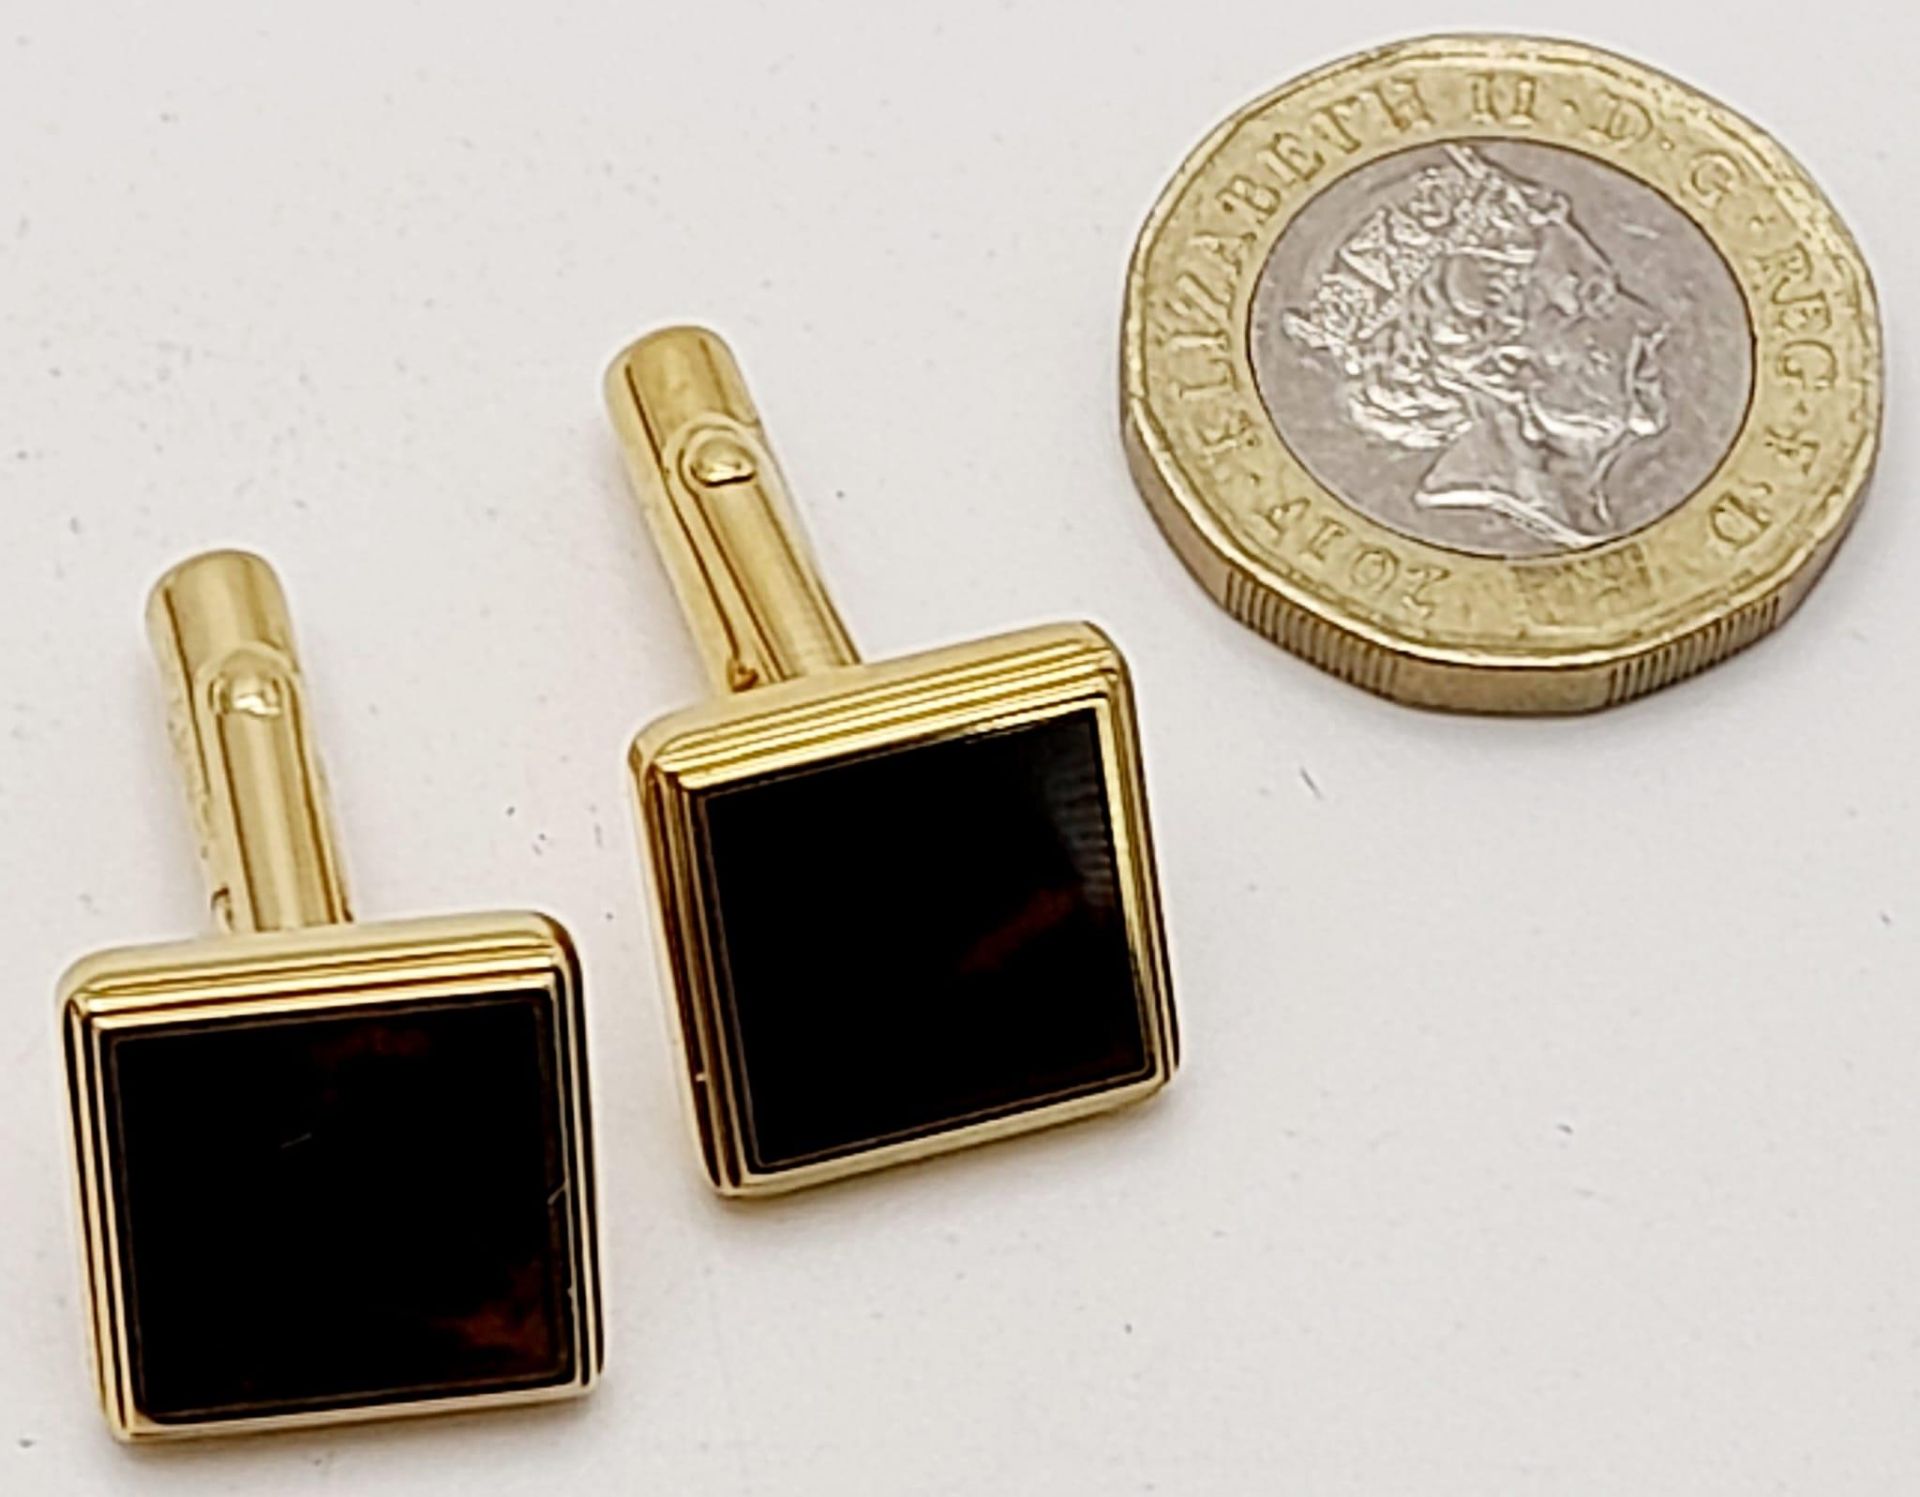 An Excellent Condition Pair of Square Yellow Gold Gilt Tortoiseshell Cufflinks by Dunhill in their - Image 8 of 8